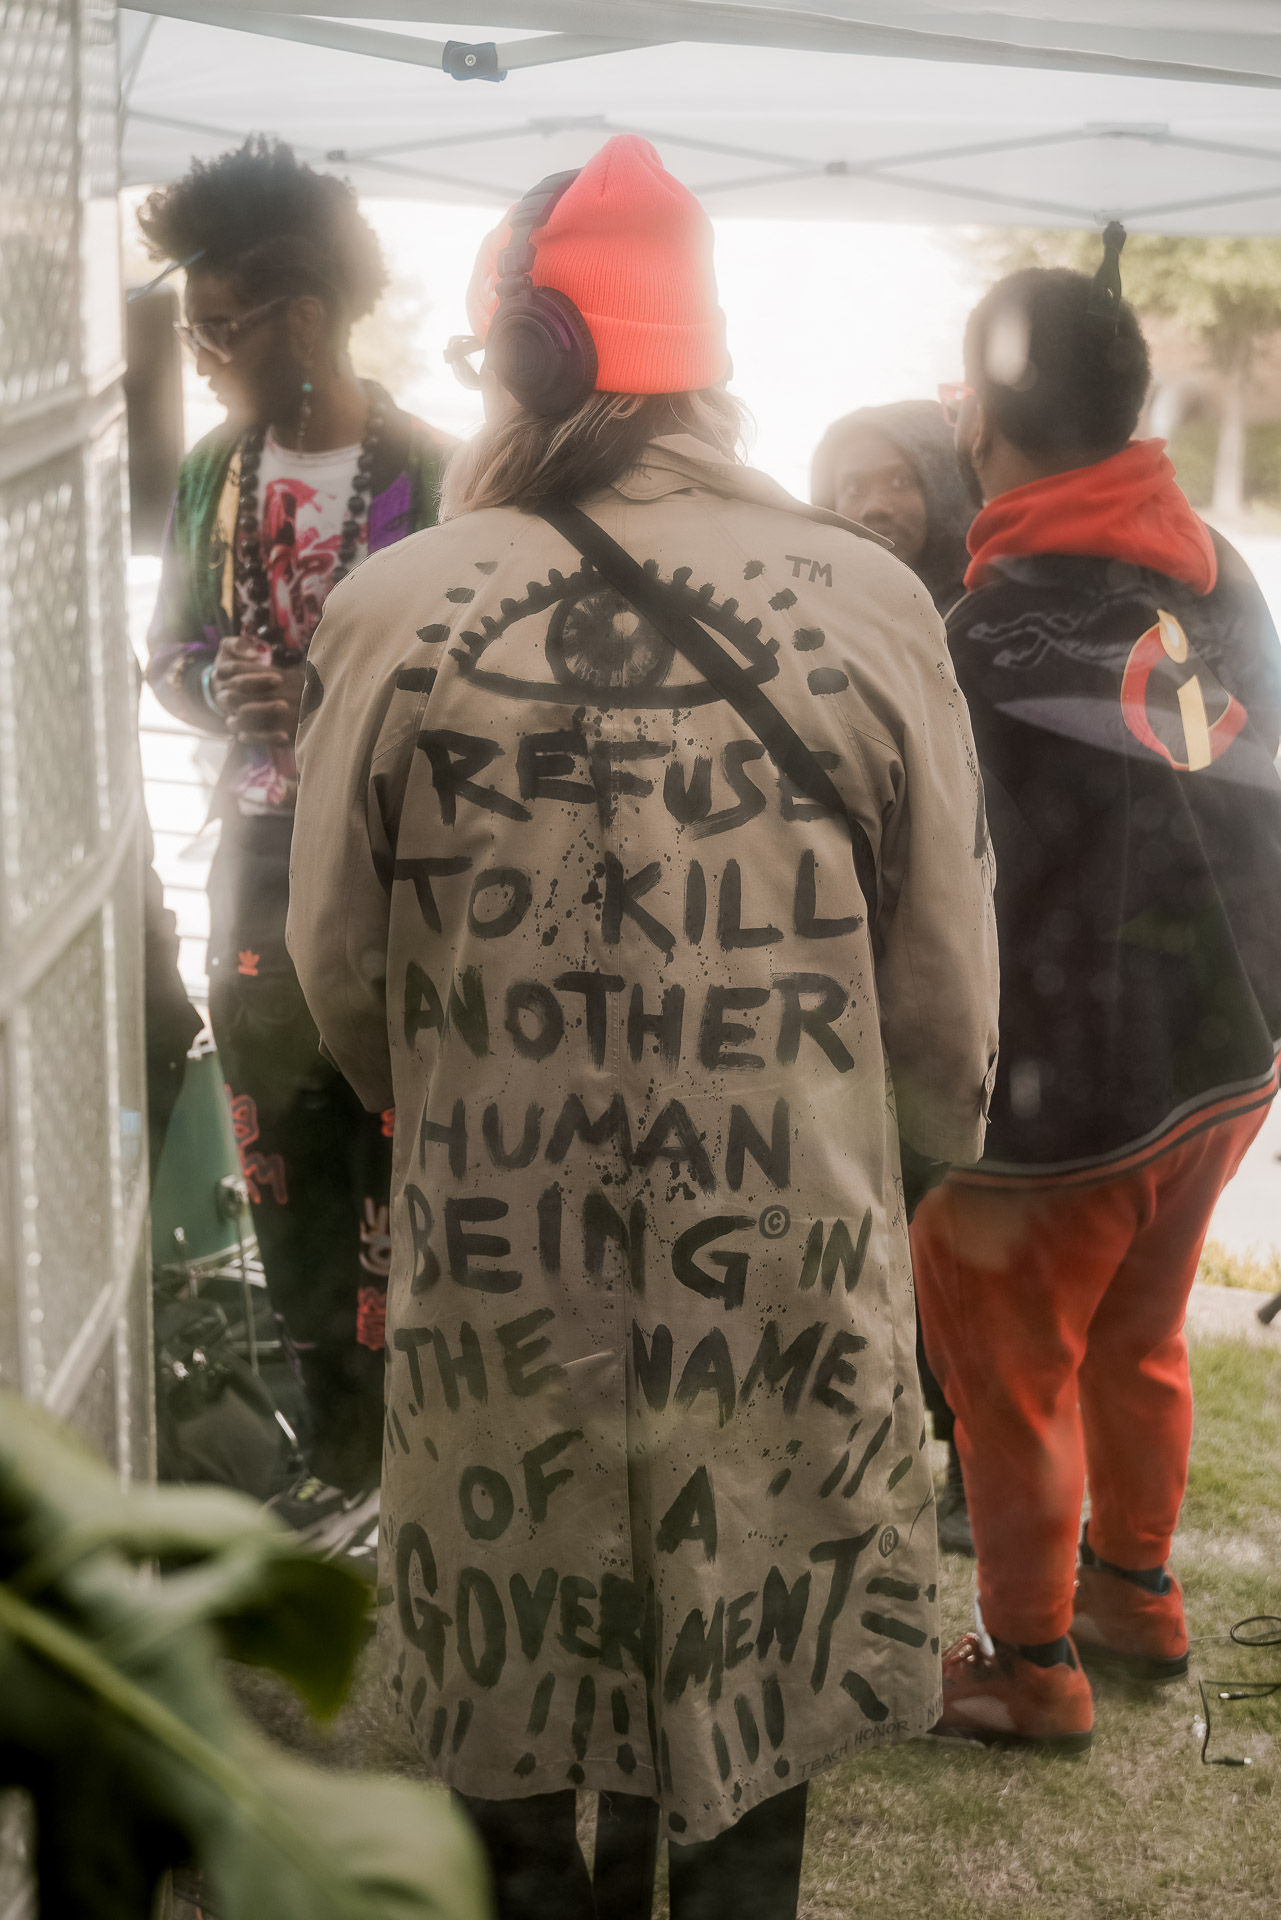 A man wearing a jacket that says "'eye' refuse to kill another human being in the name of a government"